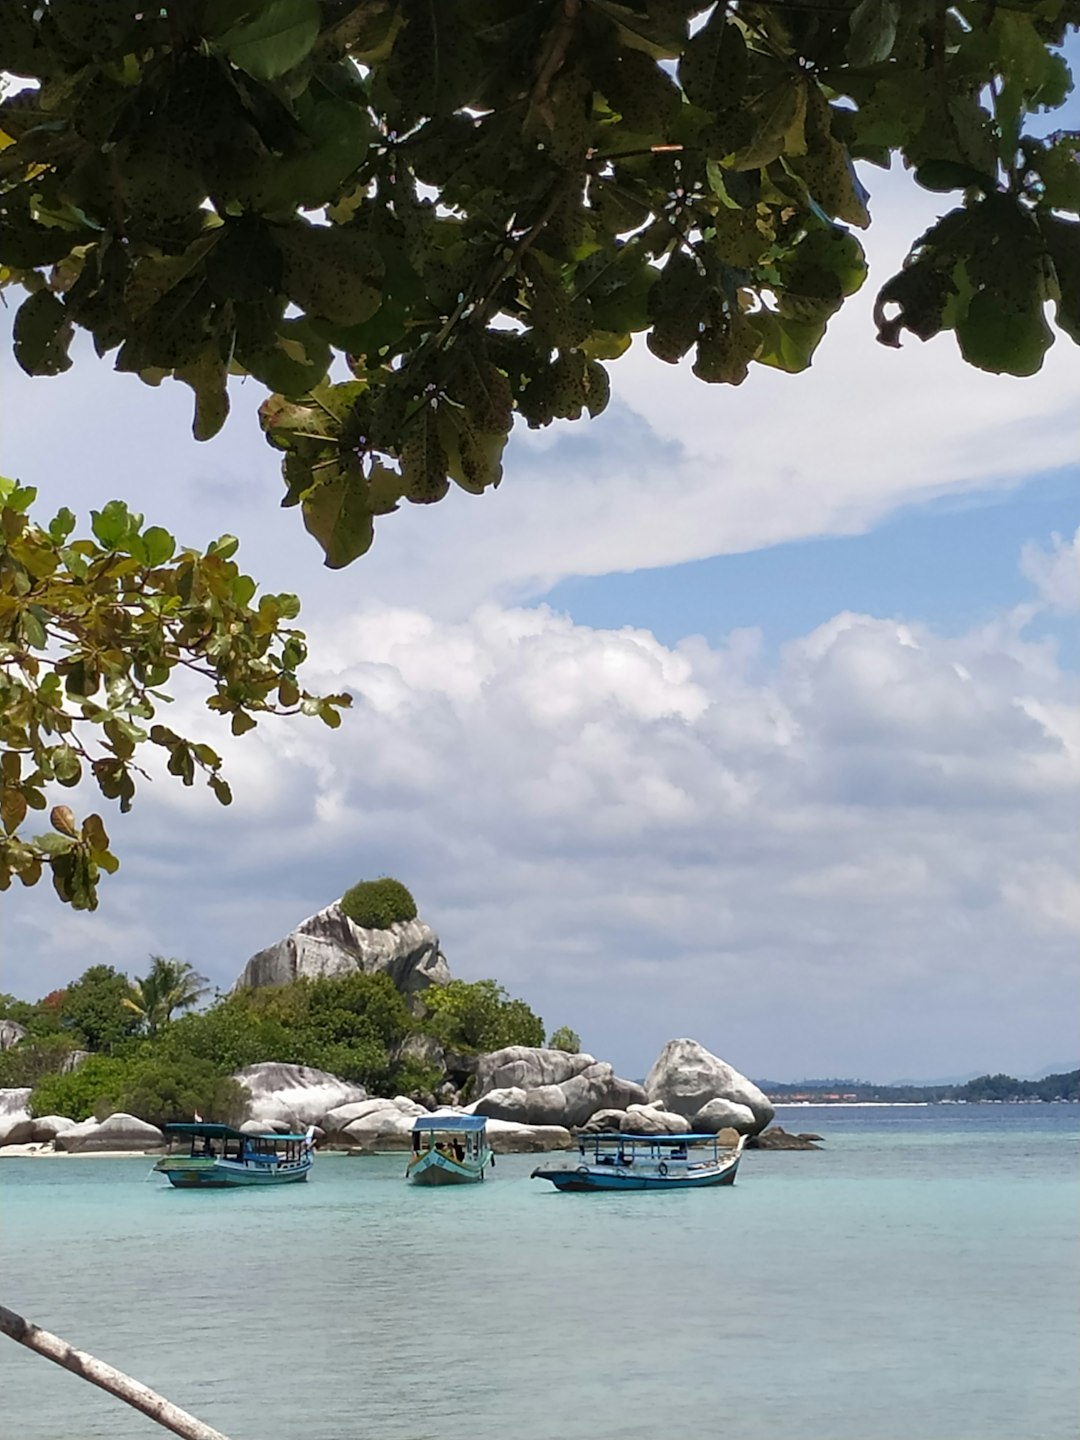 Travel Tips and Stories of Bangka Belitung Islands in Indonesia